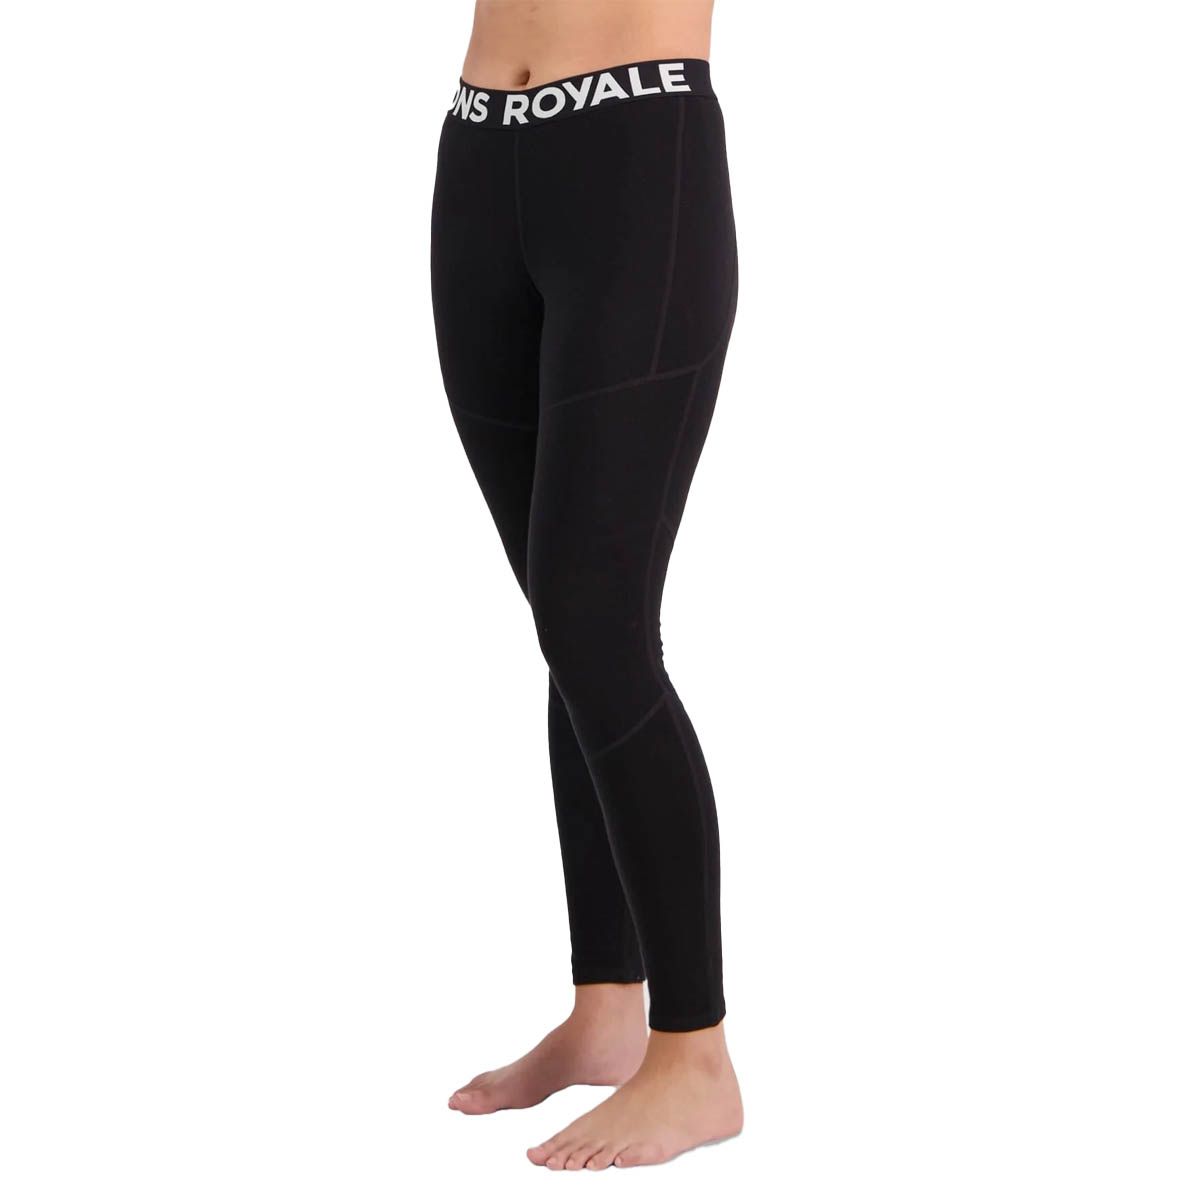 Mons Royale Olympus Women's Tights Black Large